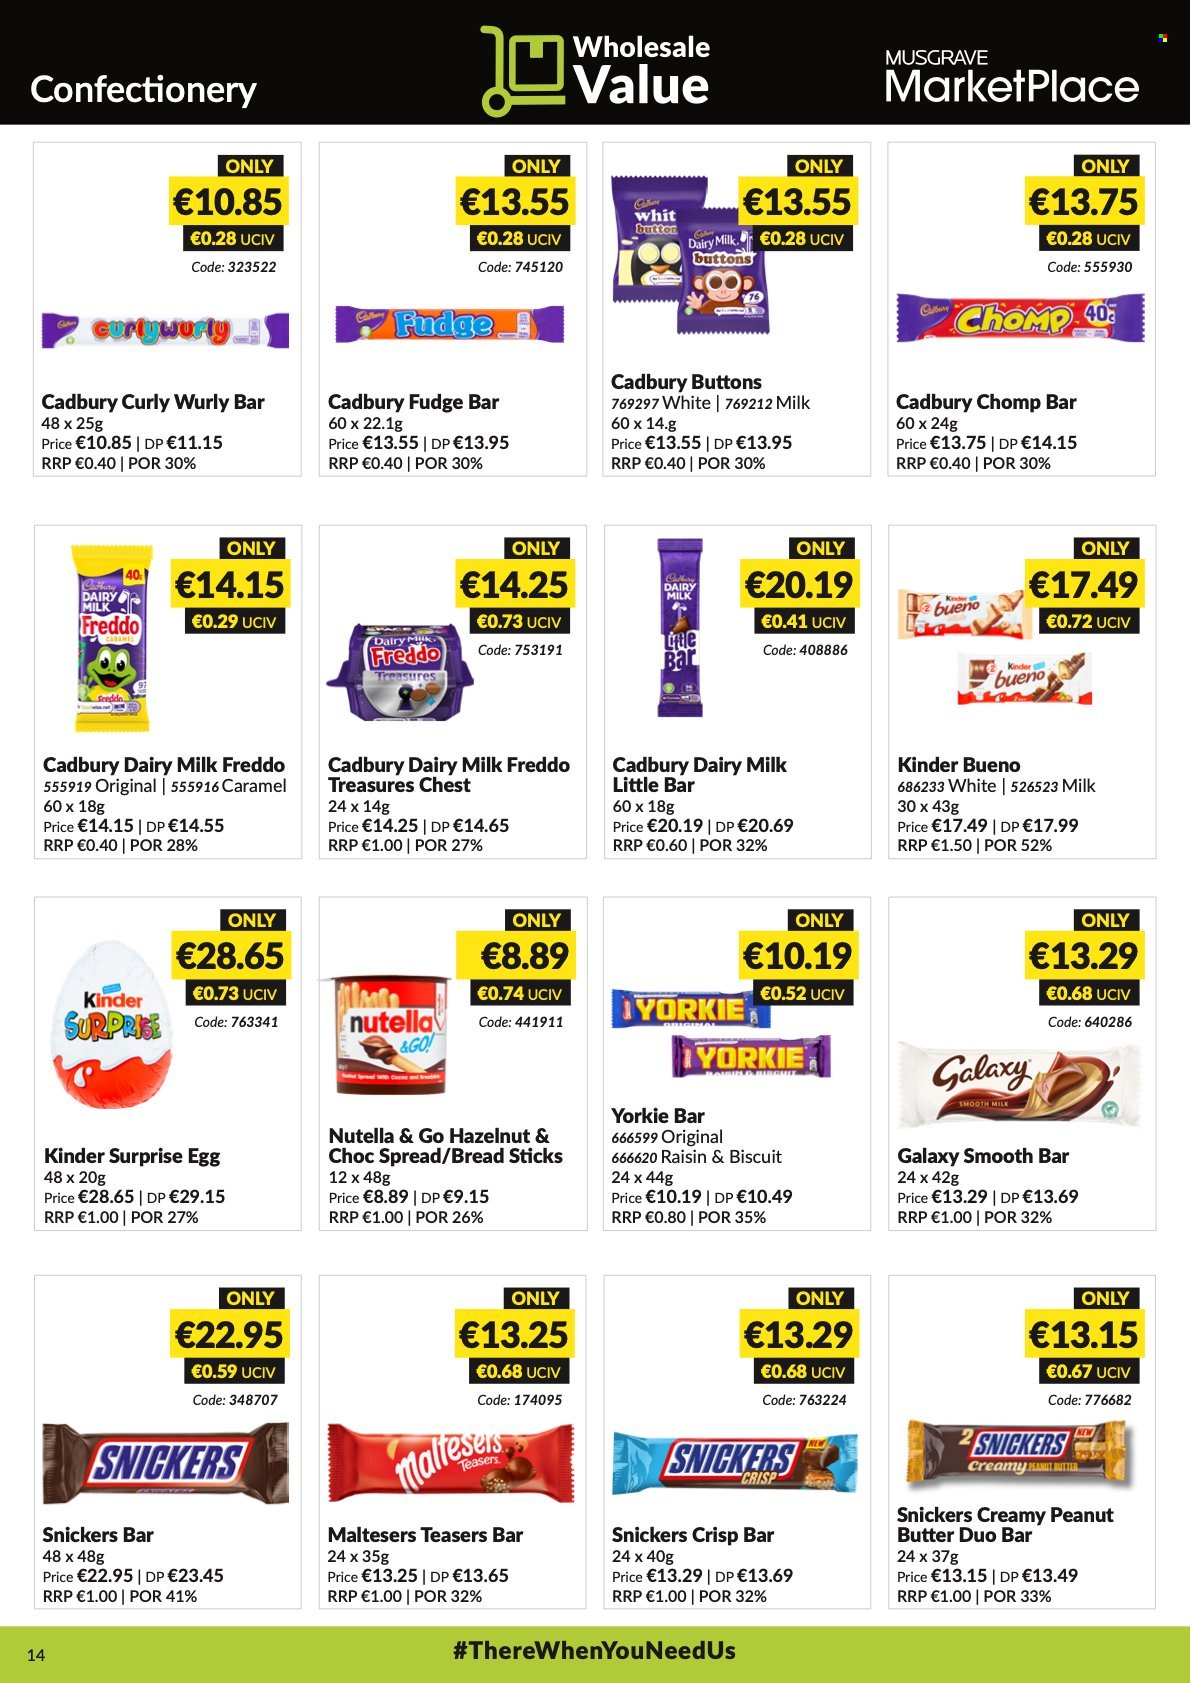 thumbnail - MUSGRAVE Market Place offer  - 26.09.2021 - 23.10.2021 - Sales products - eggs, fudge, Nutella, Snickers, Kinder Surprise, Kinder Bueno, biscuit, Maltesers, Cadbury, Dairy Milk, bread sticks, caramel, peanut butter. Page 14.